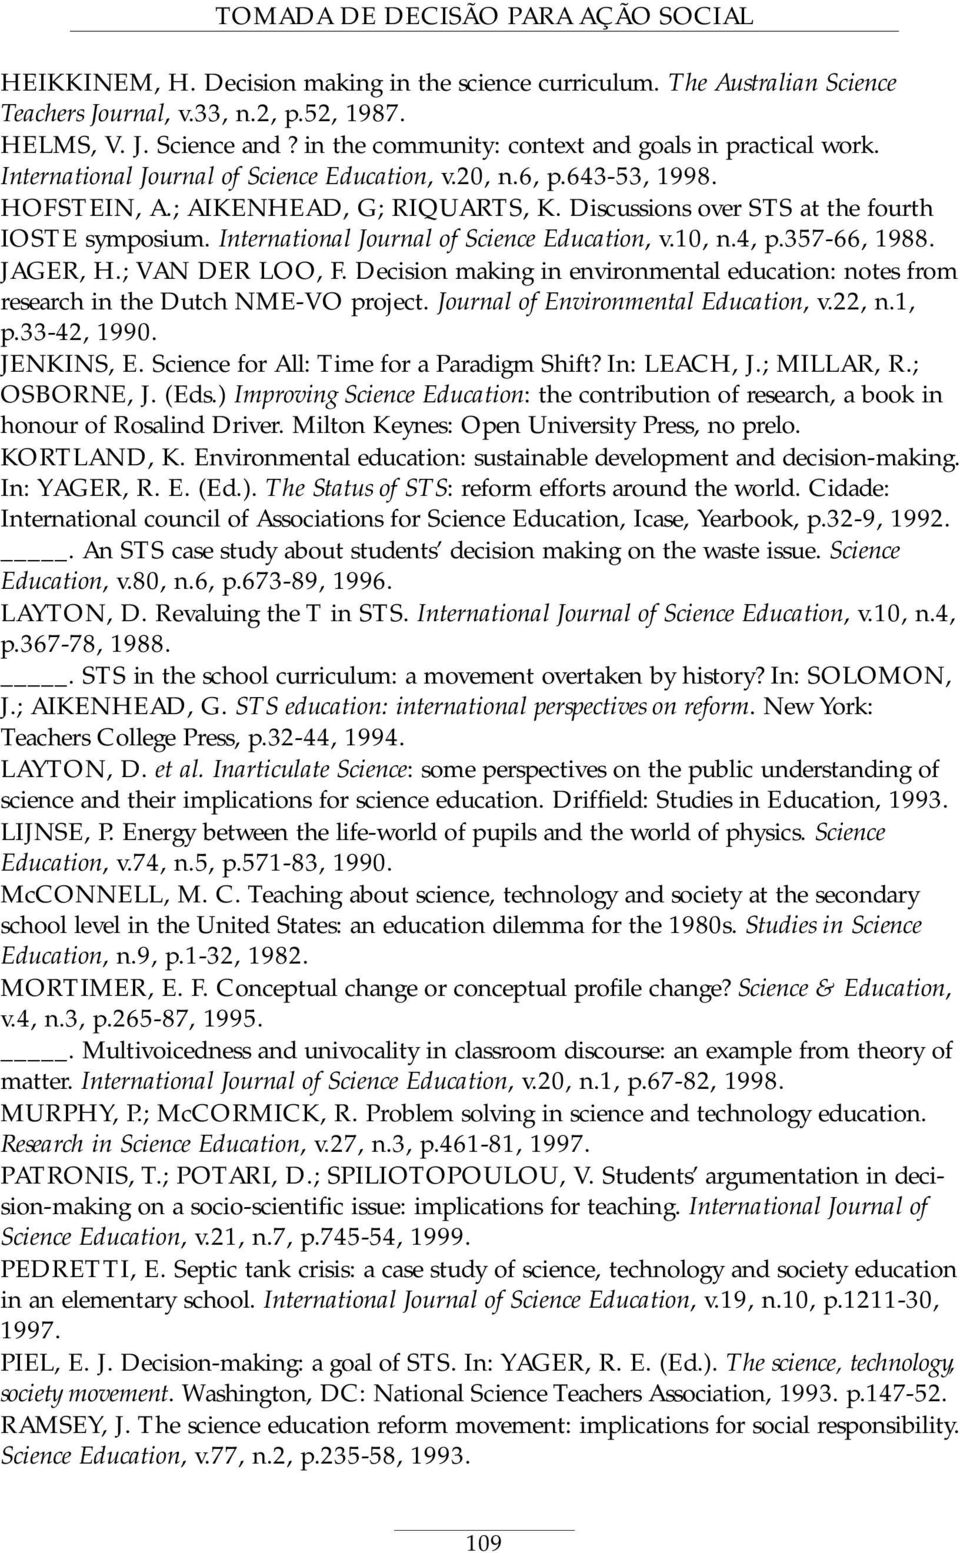 Discussions over STS at the fourth IOSTE symposium. International Journal of Science Education, v.10, n.4, p.357-66, 1988. JAGER, H.; VAN DER LOO, F.